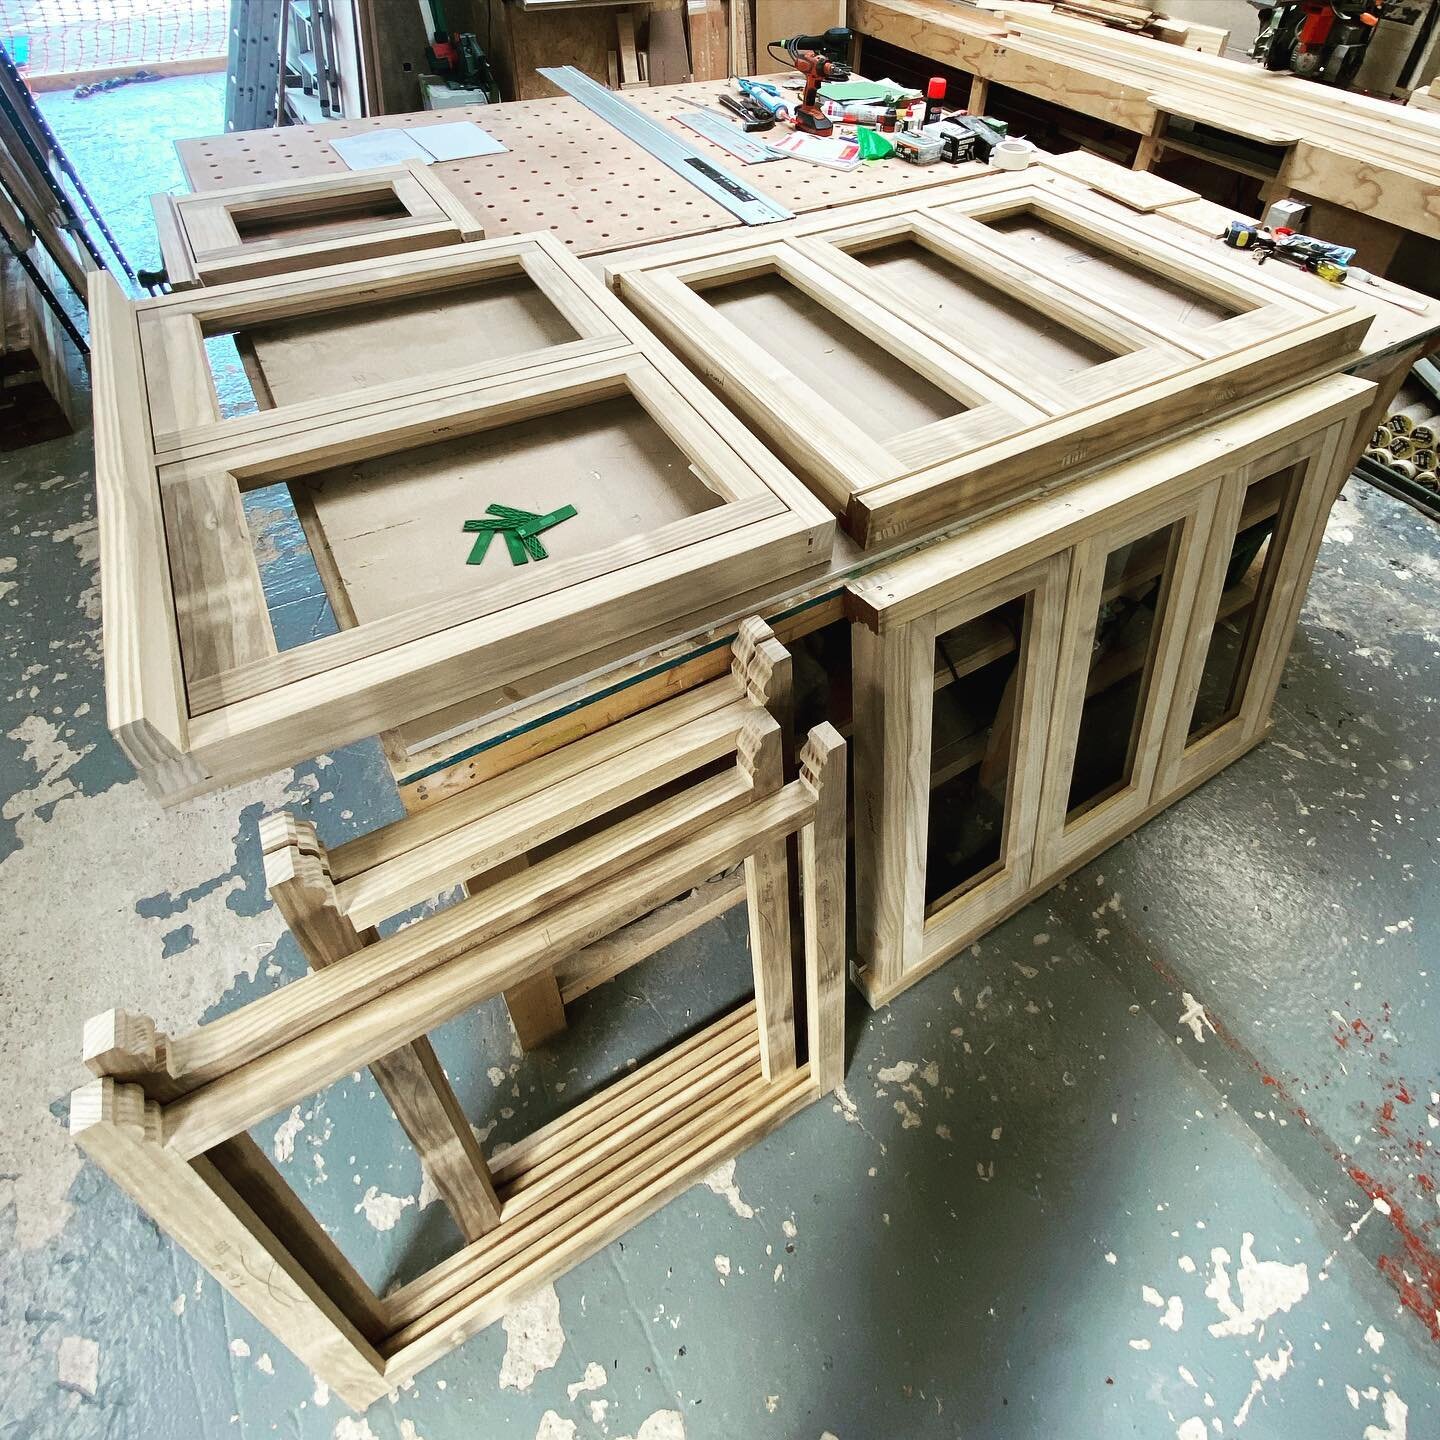 Mixture of our conservation flush casement windows and sliding sash windows currently being manufactured for a property in #liverpool #merseyside 
&bull;
&bull;
#ecosash #ecosashwindows #timberwindows #sashwindows #flushcasementwindows #periodhome #v